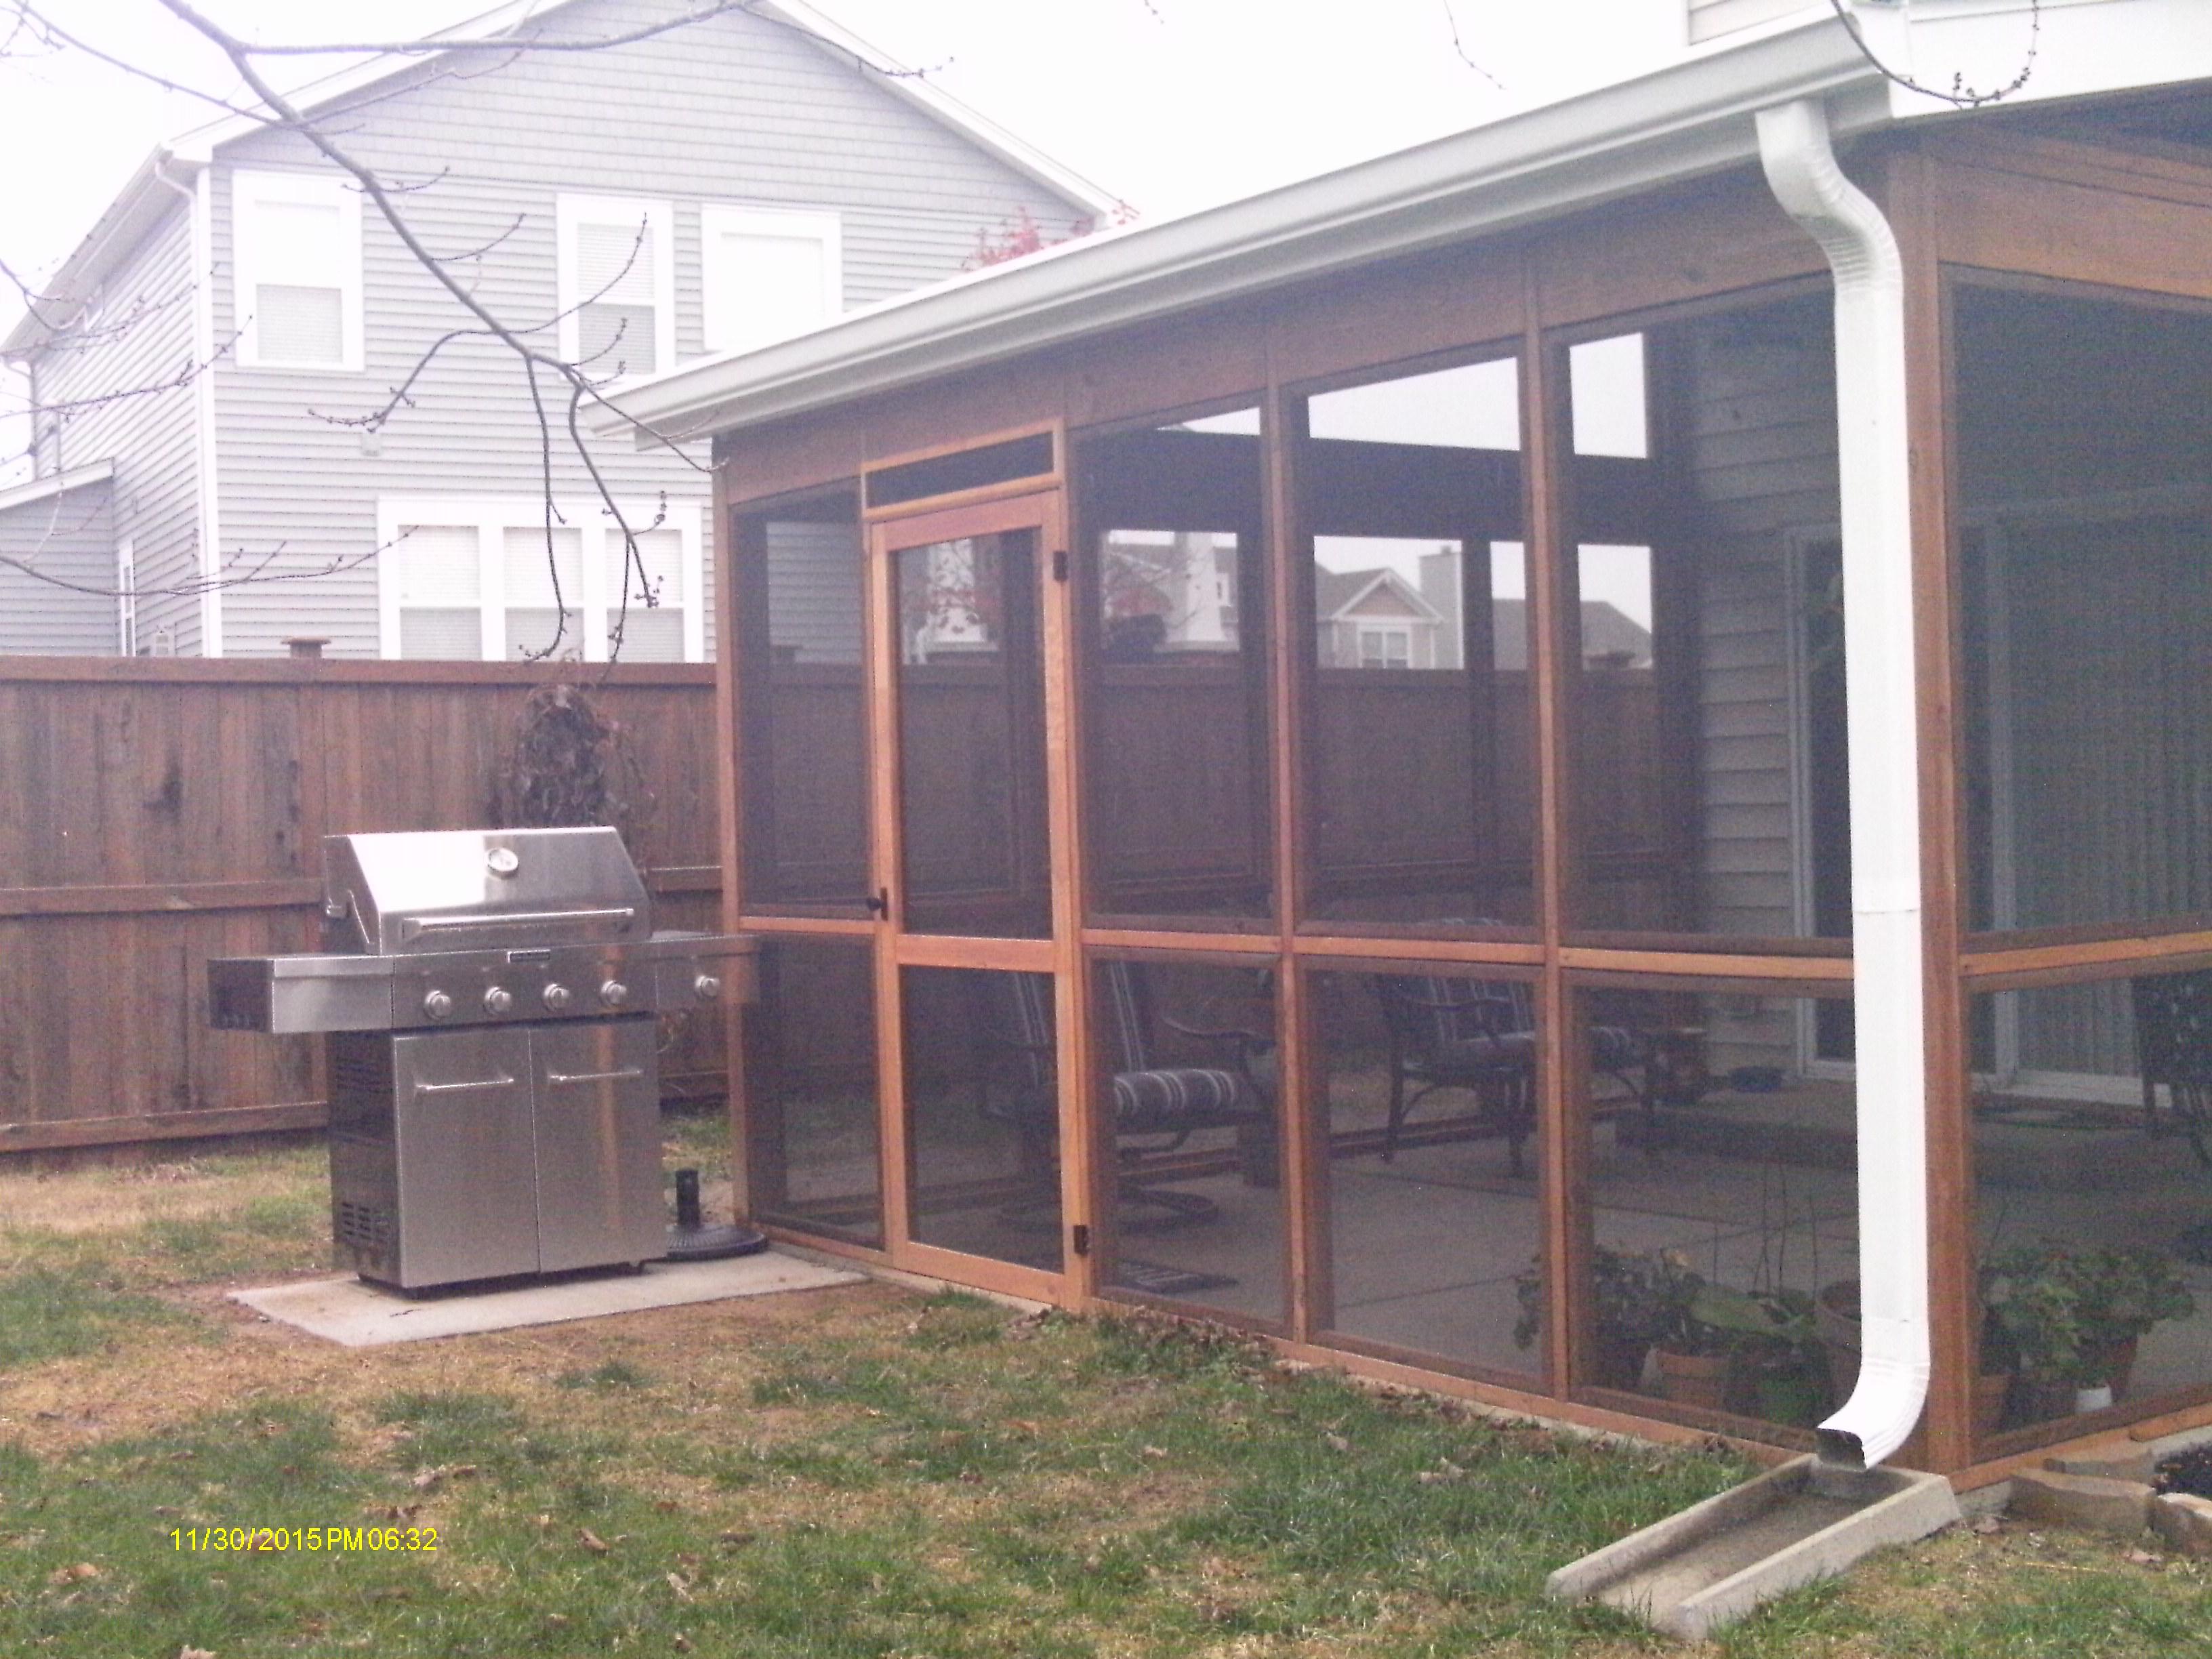 The customer wanted a screened in porch to enjoy their backyard further. Their dreams became a reality! There was an existing concrete pad that was extended and built on as the base of the porch. We also added a concrete pad that is attached to the outside of the porch for the grill. 